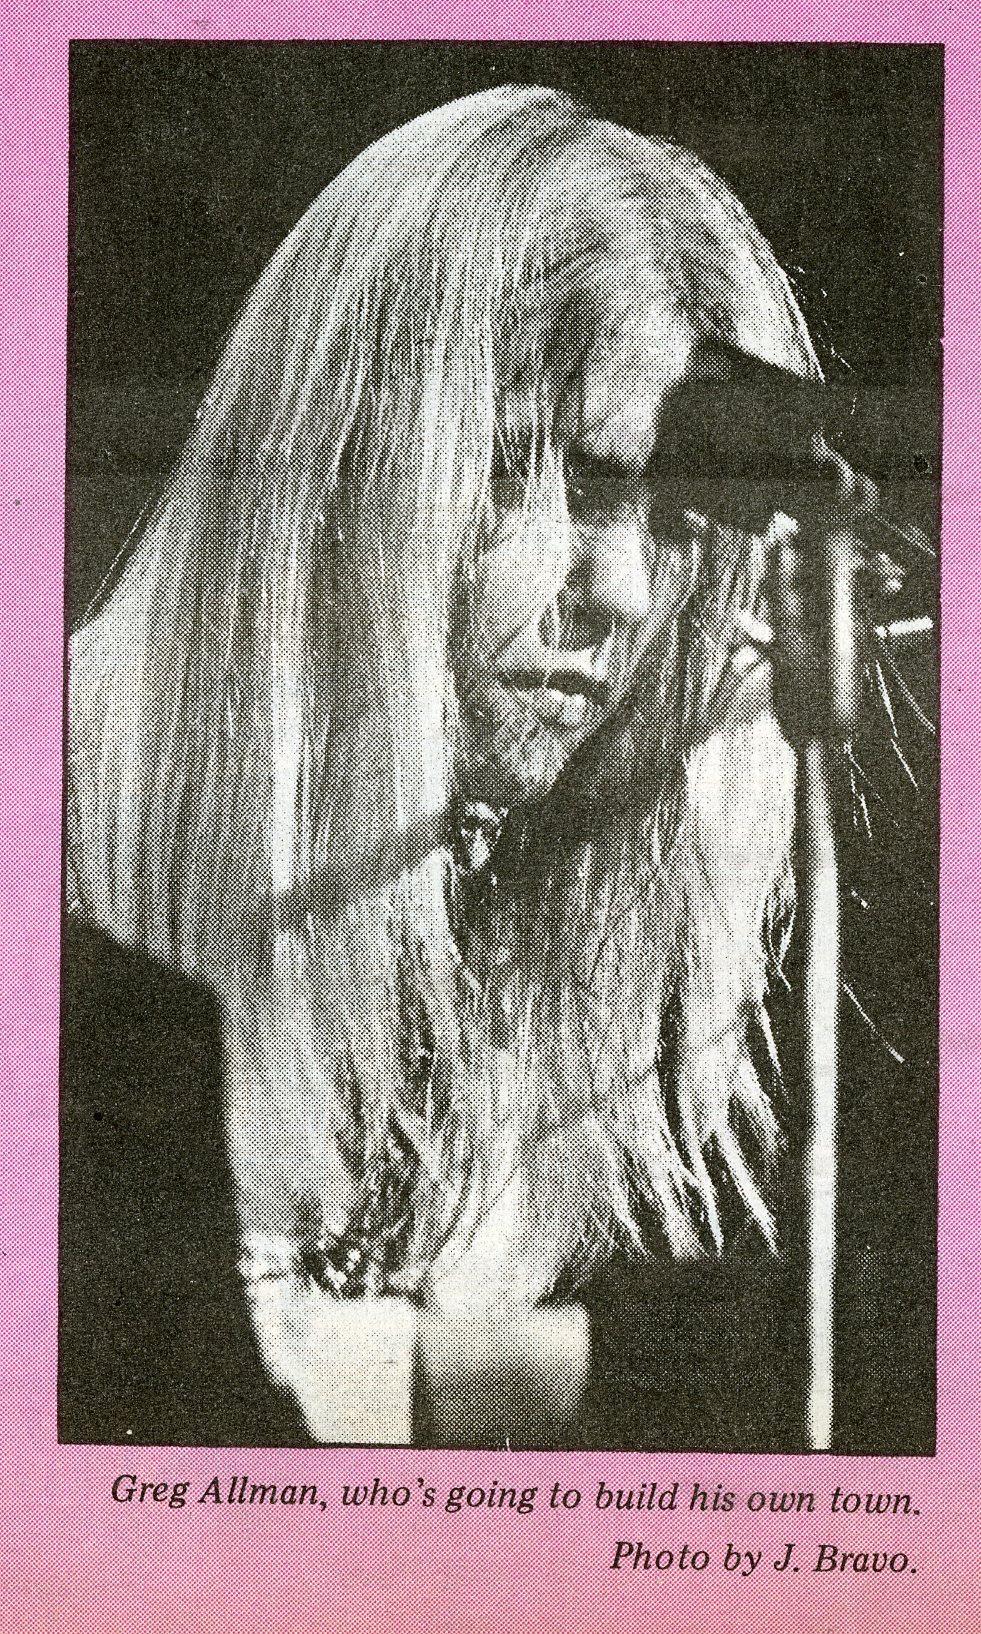 Gregg from June 1972 issue of Rock Magazine. Possibly at Academy of Music, NYC.